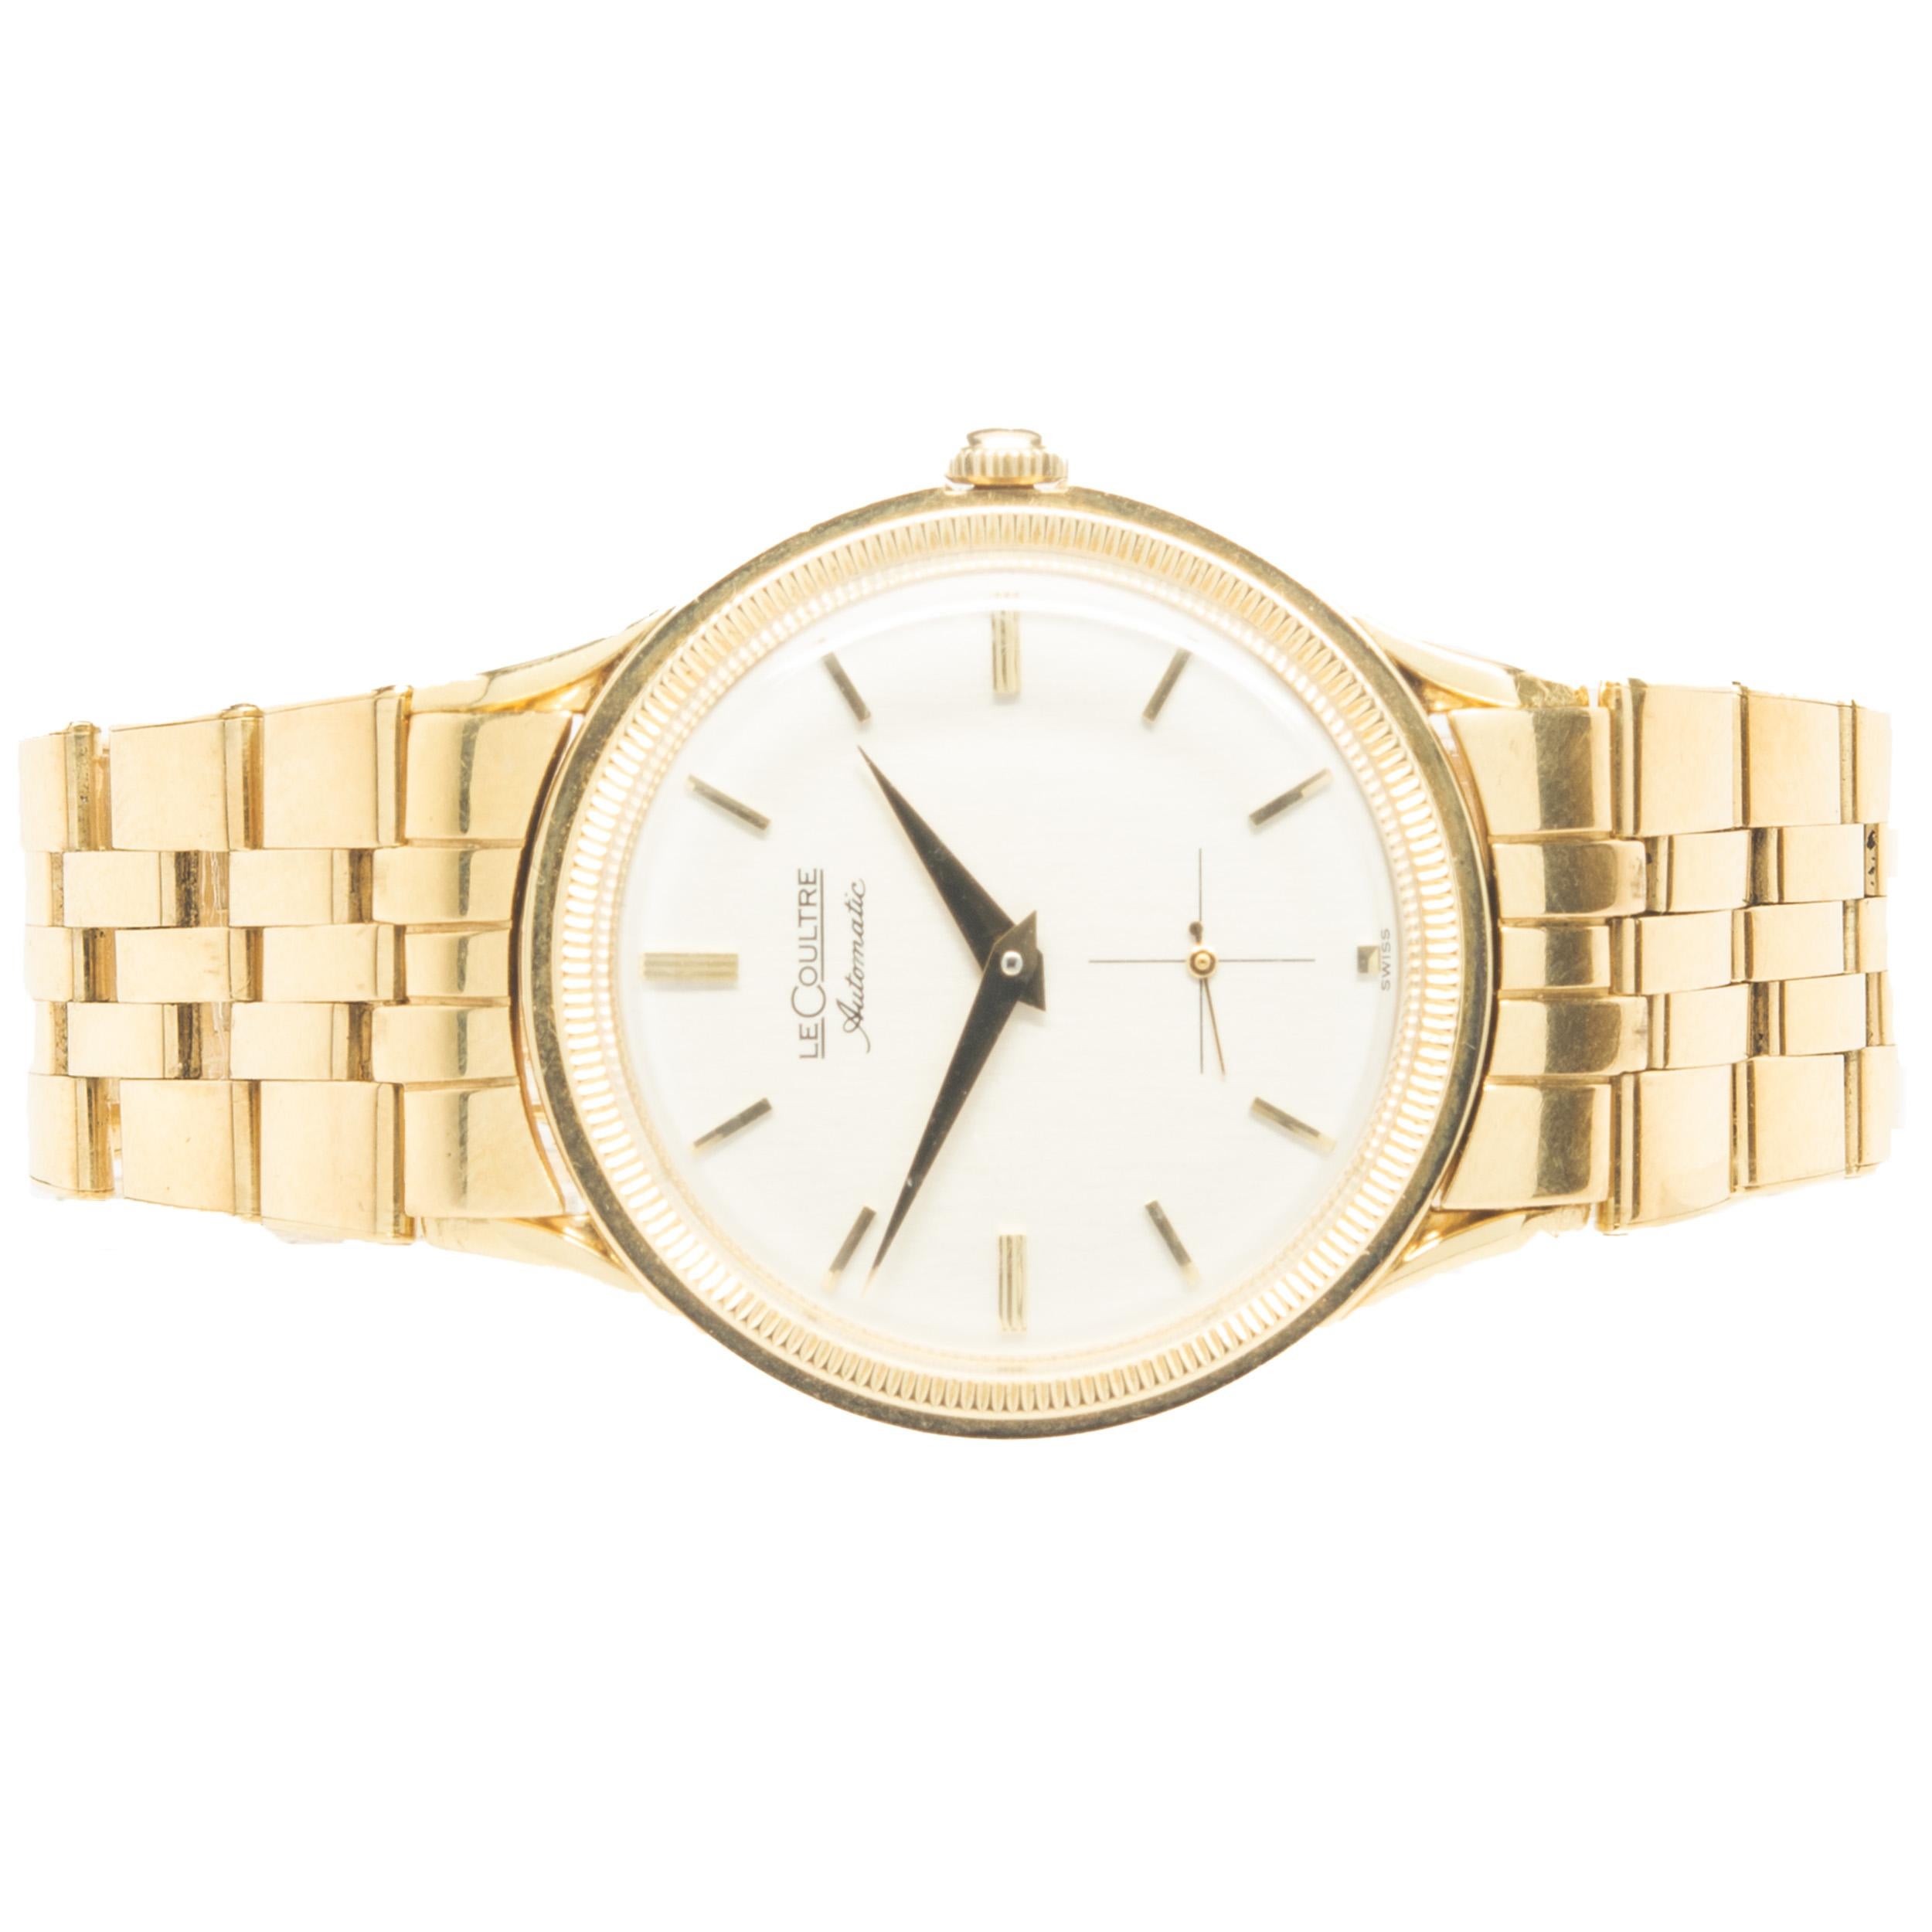 Movement: manual
Function: hours, minutes, seconds
Case: 36mm round case, smooth bezel
Dial: white stick
Band: 14K yellow gold stretch link bracelet, integrated clasp 
Serial #: 11585XXX
  
No box or papers included
Guaranteed to be authentic by